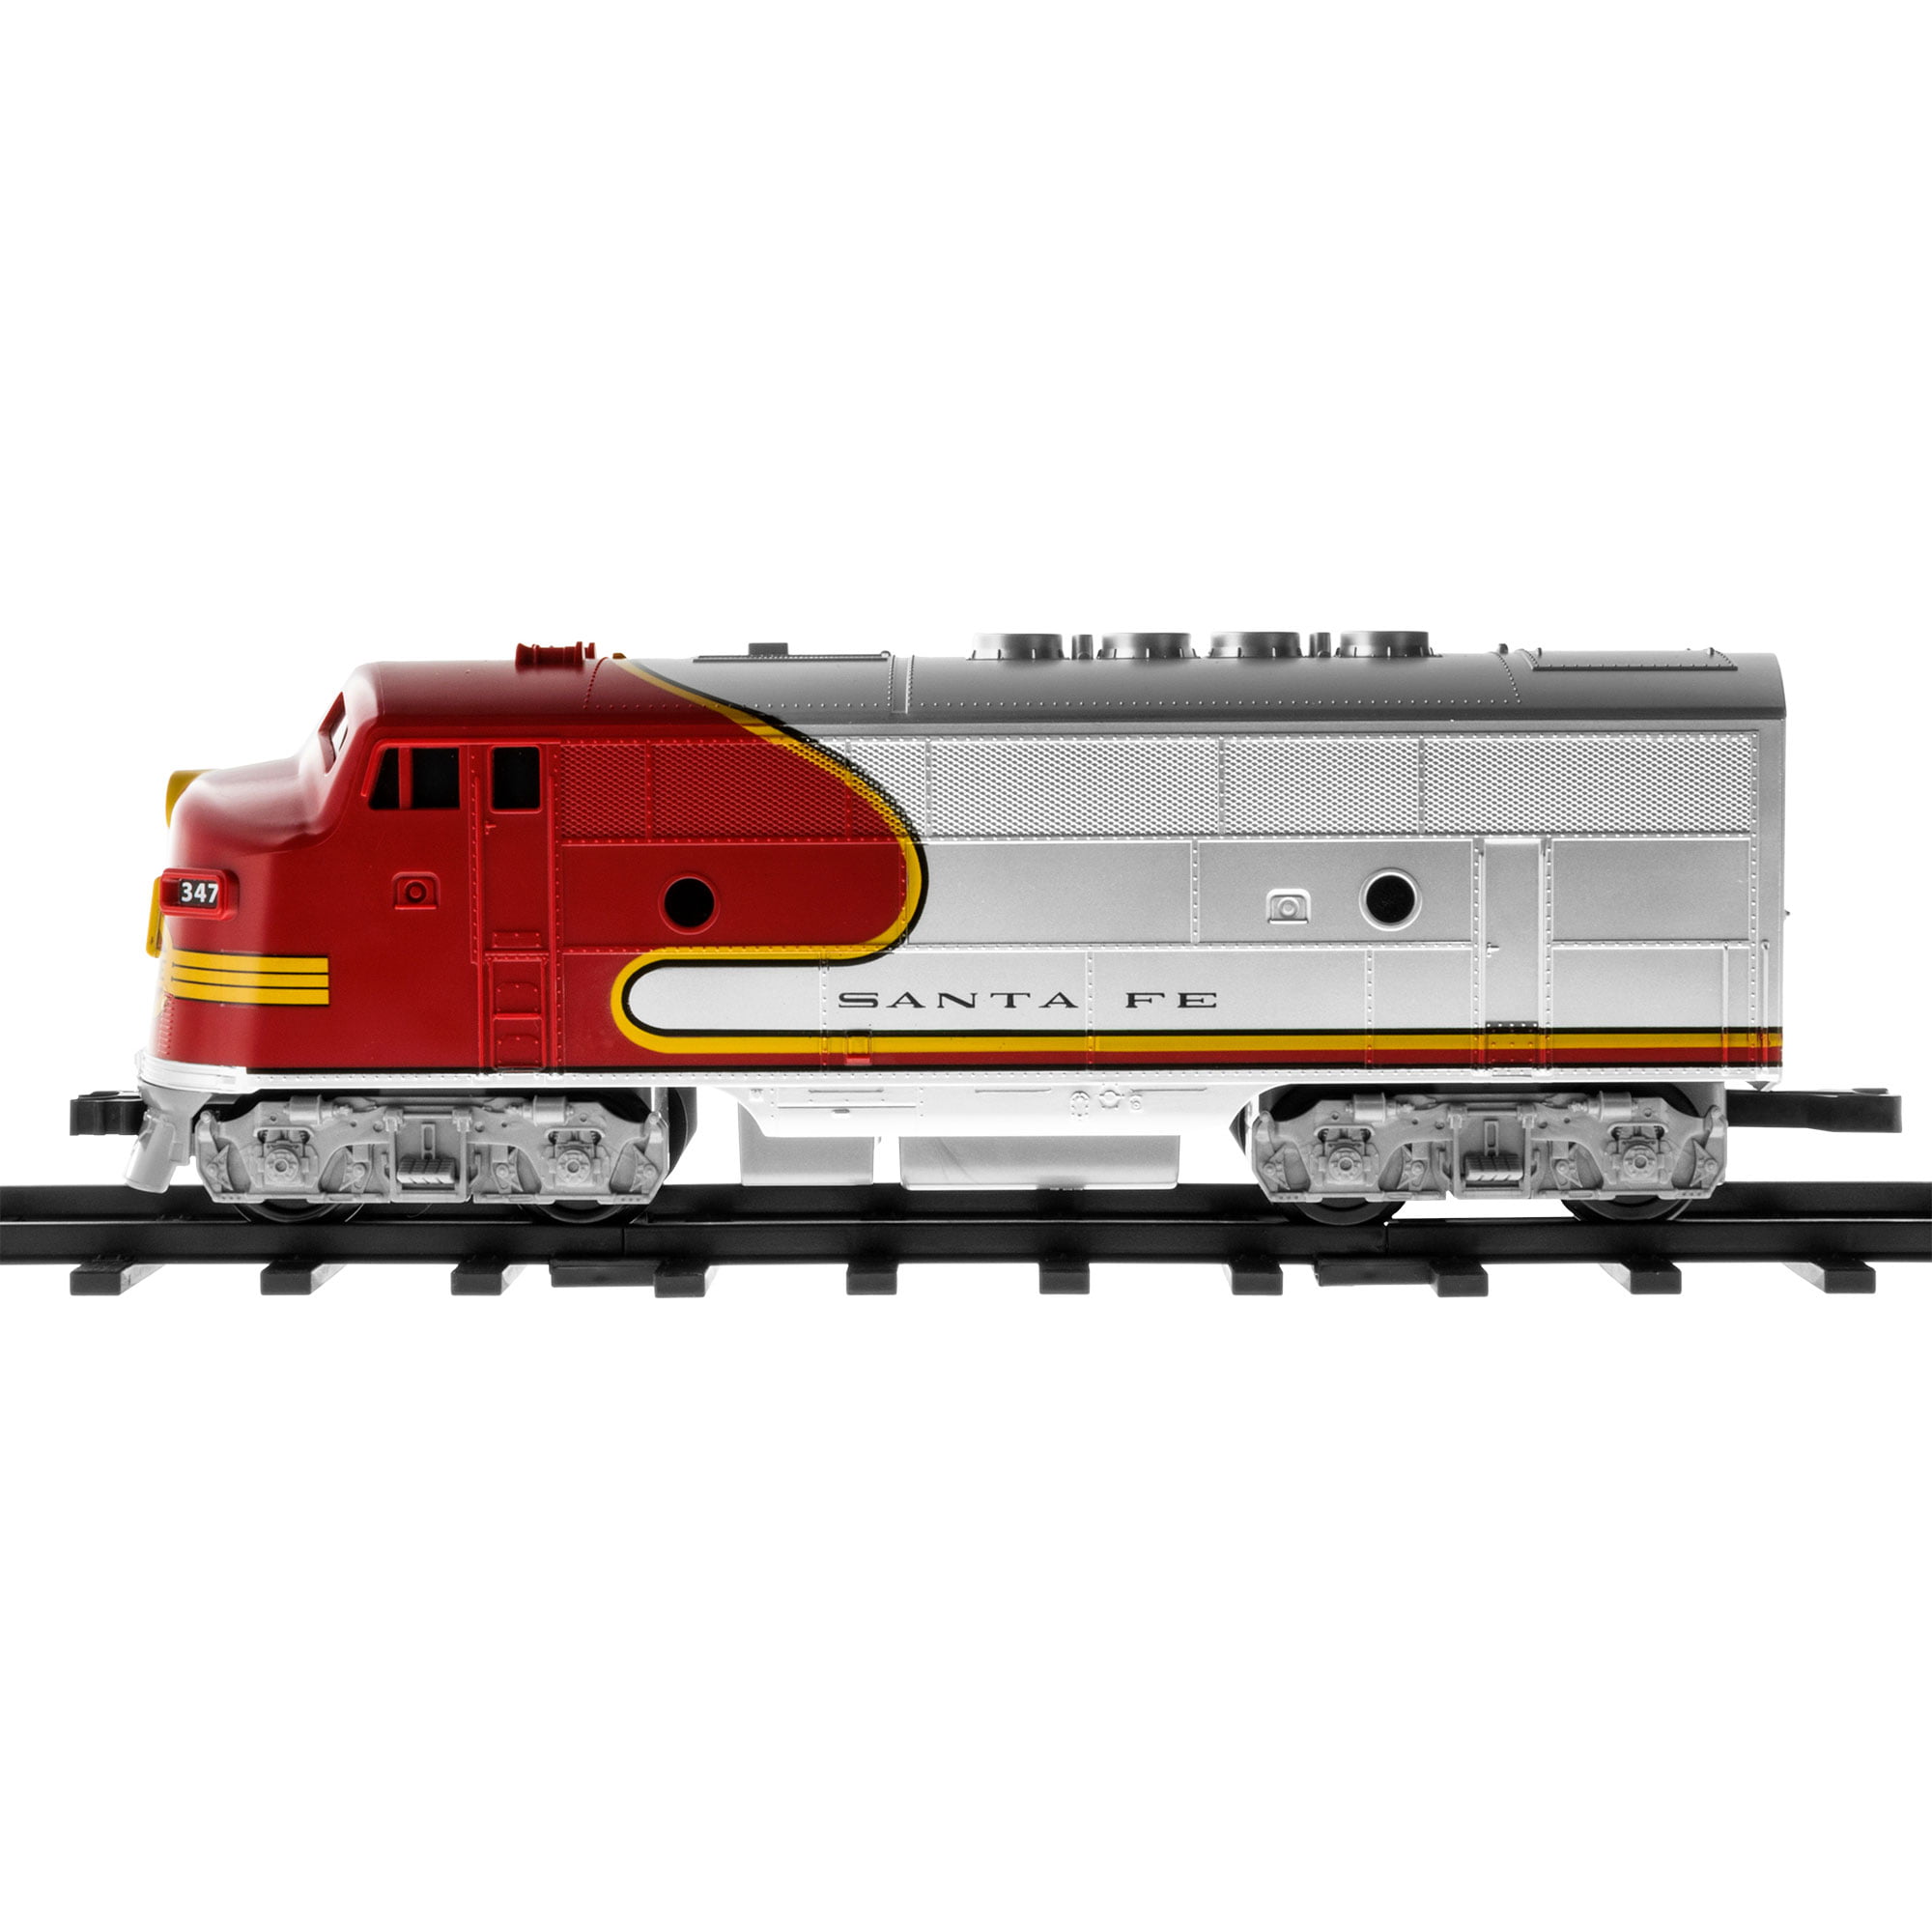 Lionel Trains 711913 Santa FE Diesel Passenger Ready to Play Train Set Red for sale online 